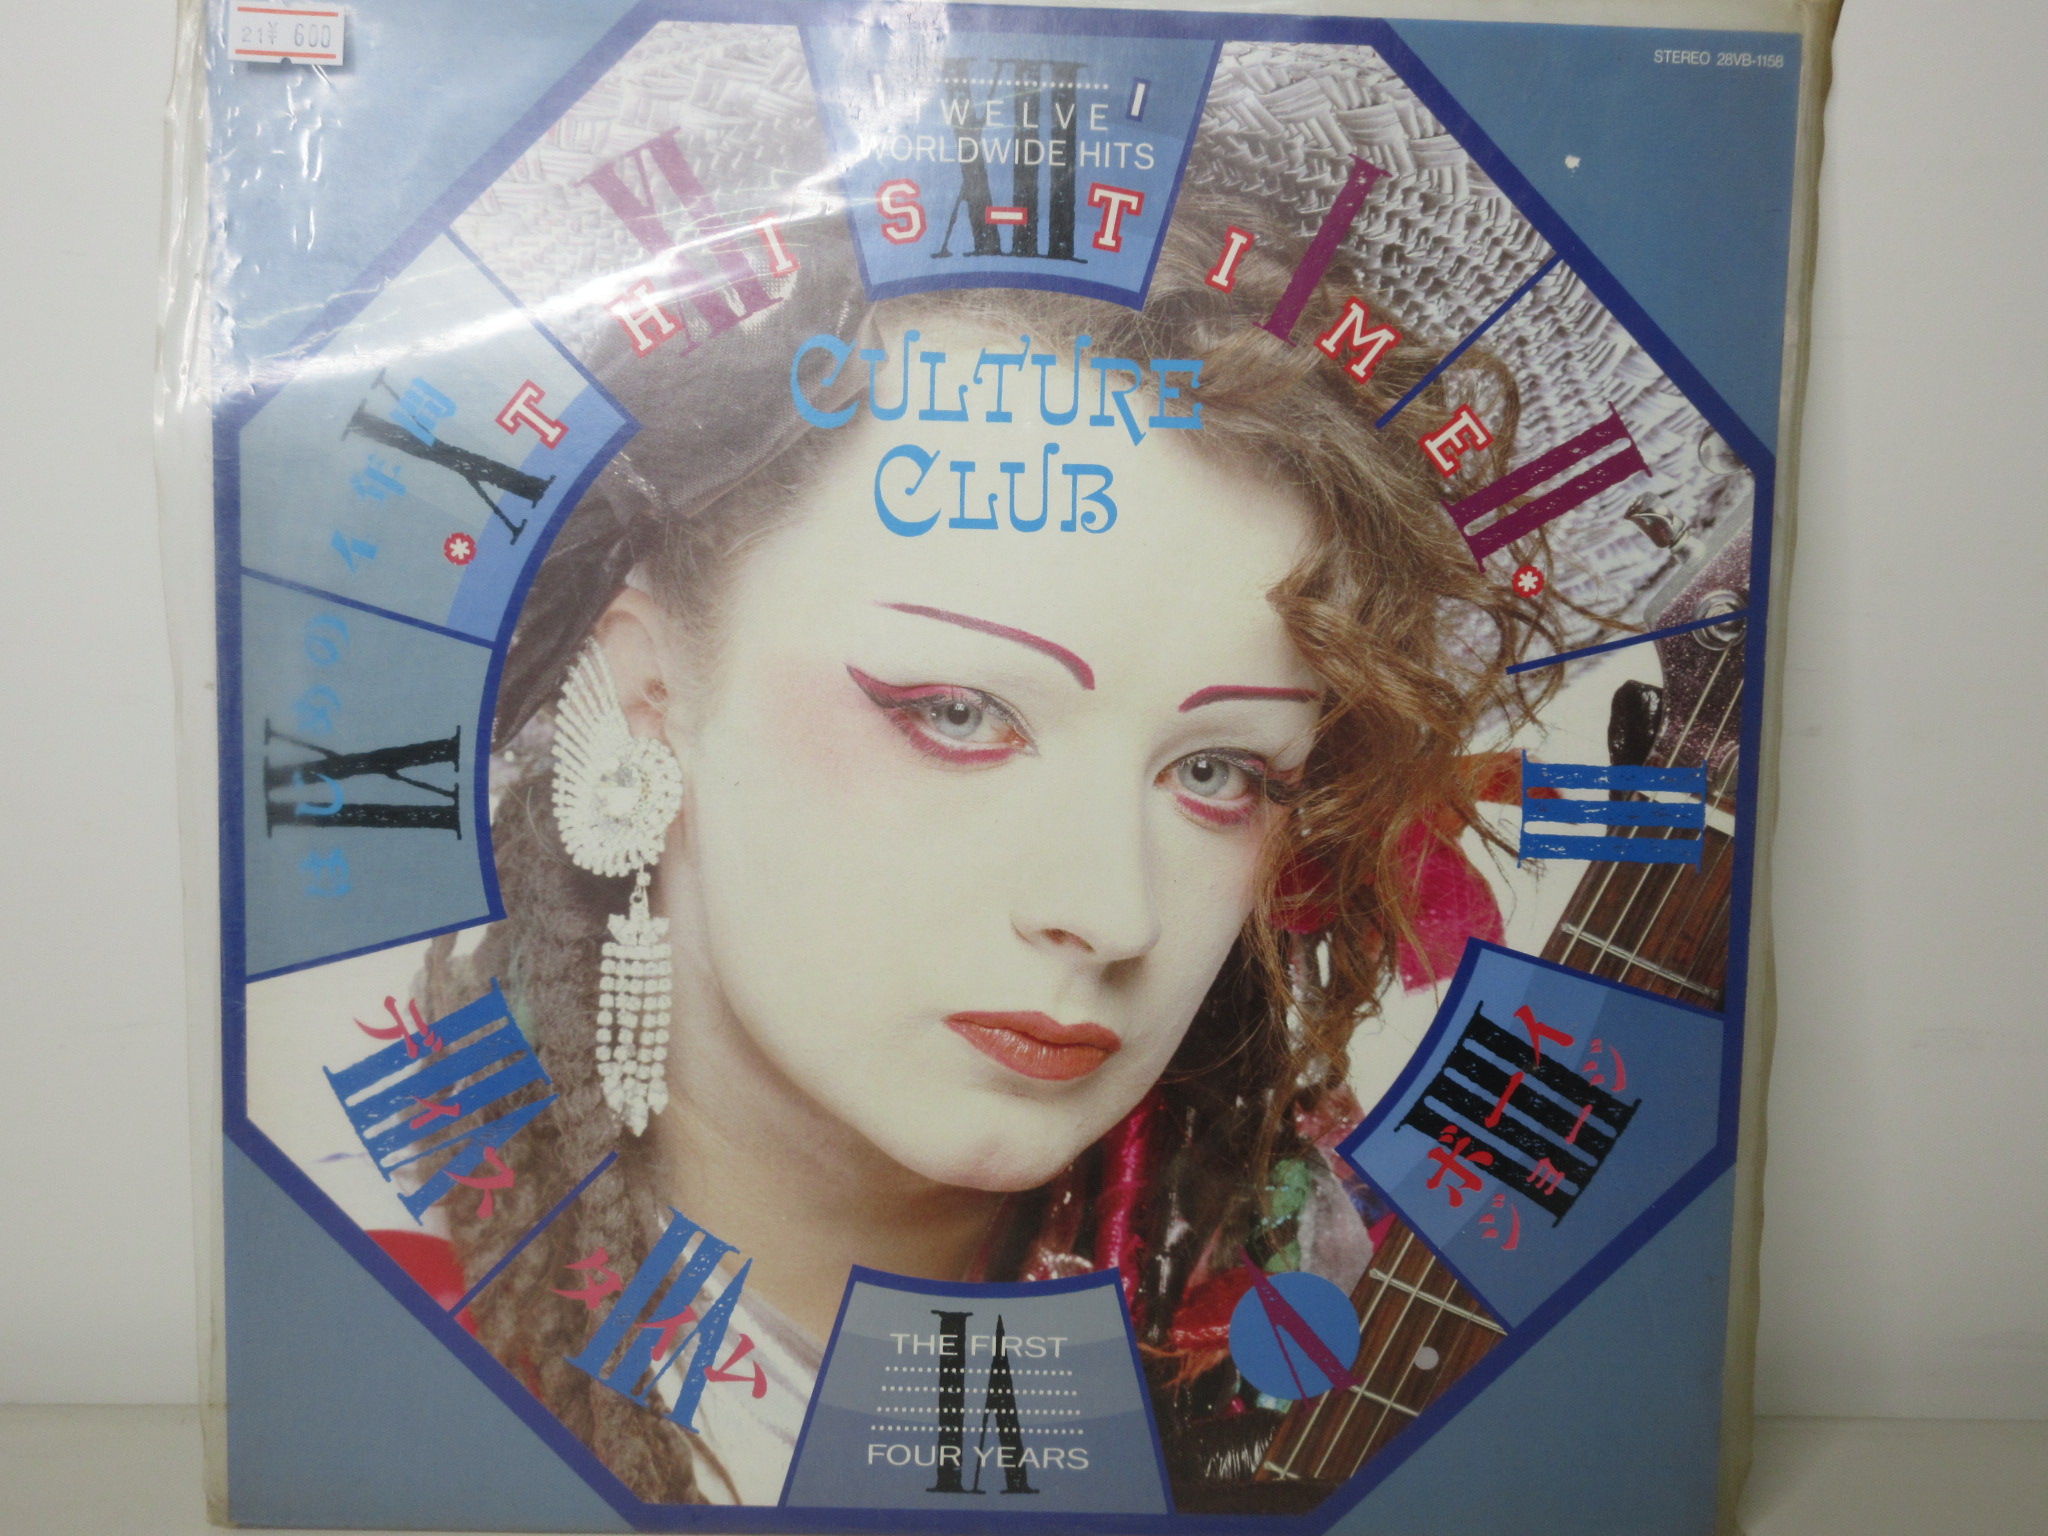 Culture Club  カルチャー・クラブ  This Time: Twelve Worldwide Hits  ディス・タイム  28VB-1158